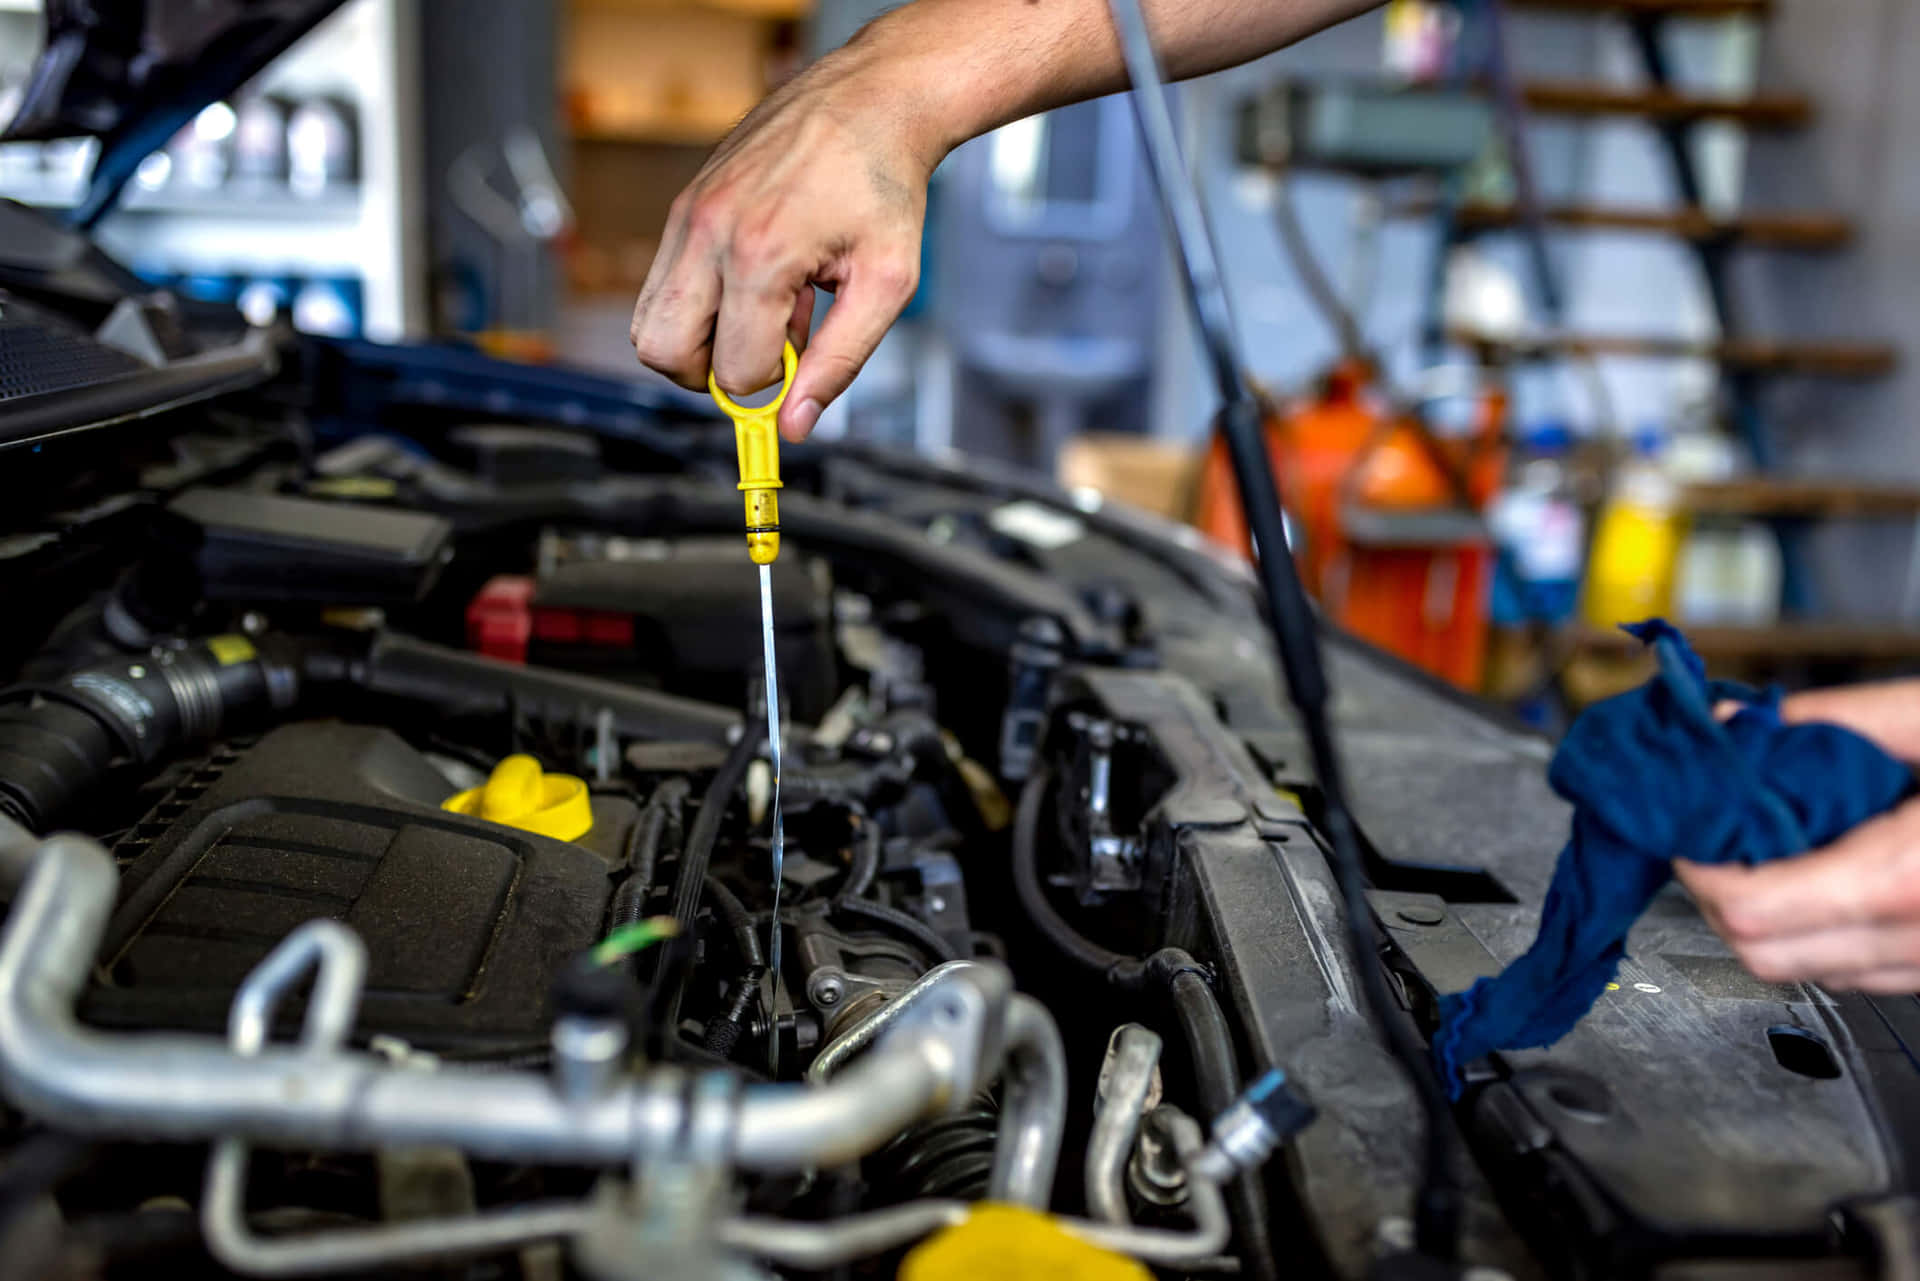 "Keeping your engine oil clean and fresh is essential for your car's health"